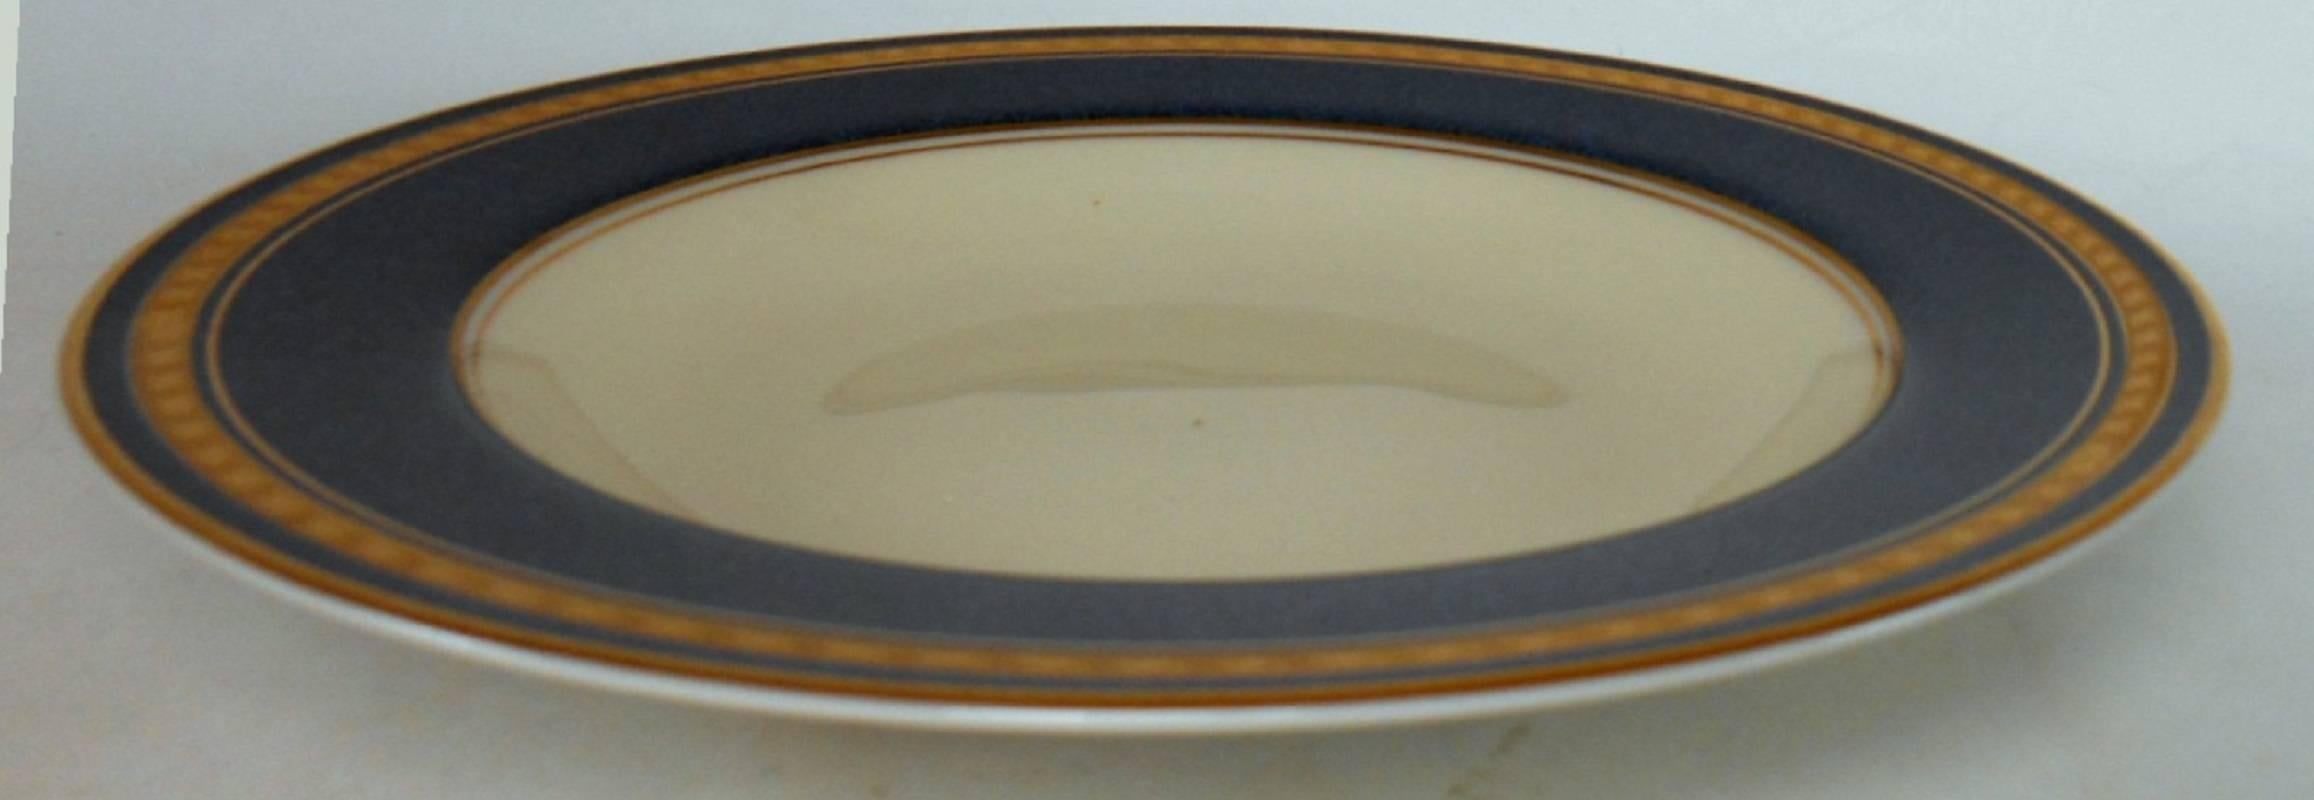 20th Century Mikasa China Imperial Lapis L2826 60-Pieces Set Service for 12